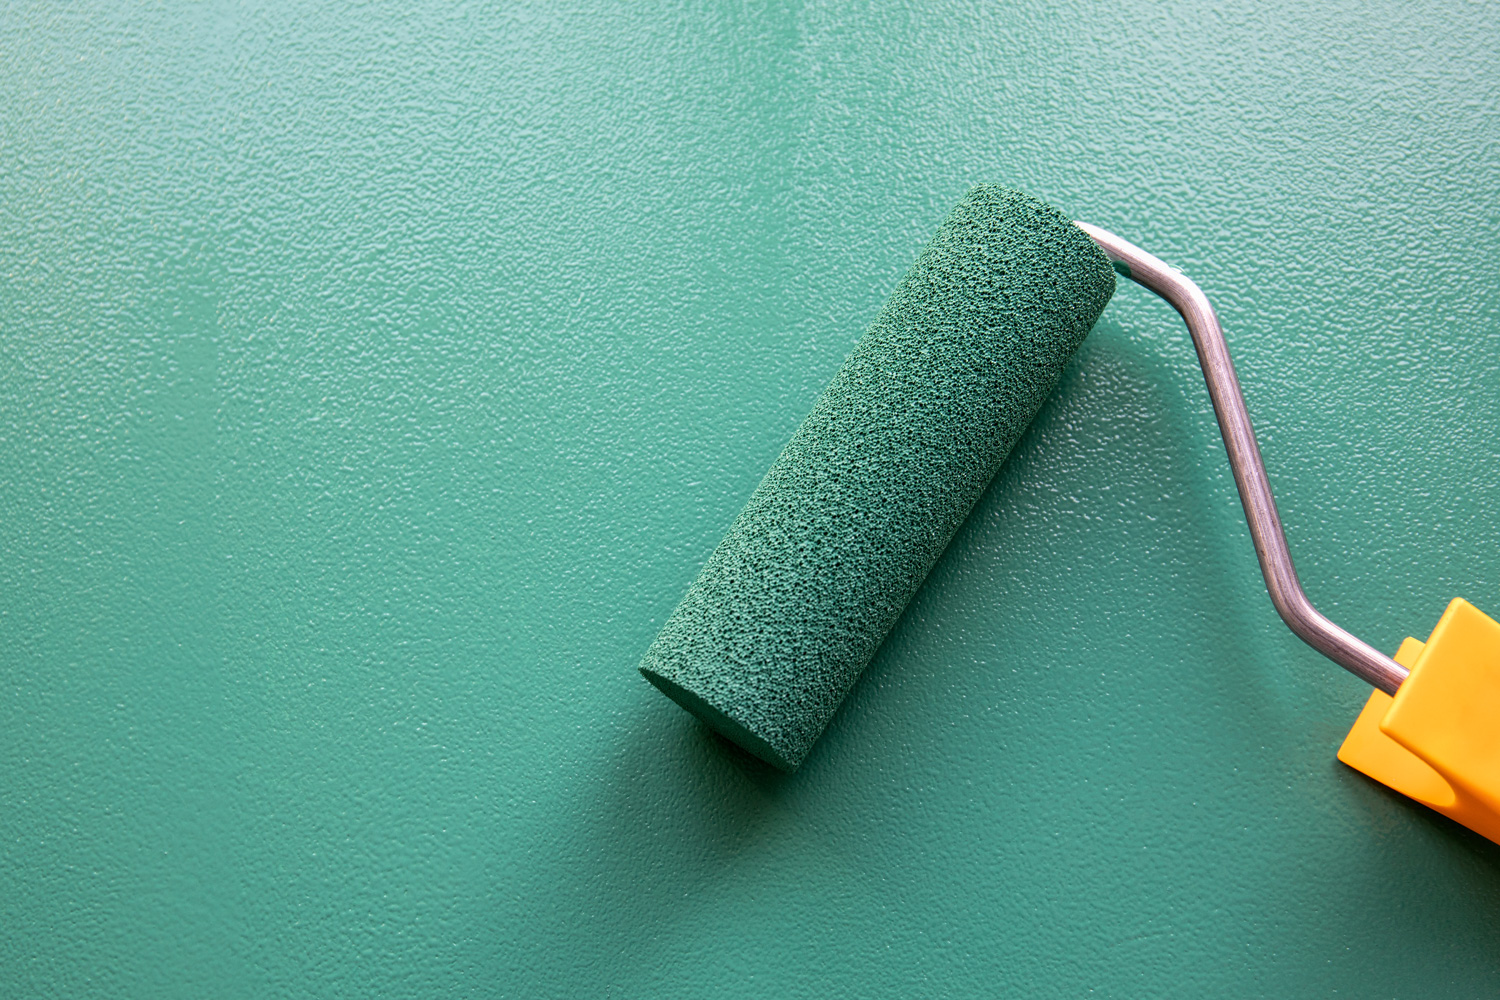 Paint roller with green colour on painted wooden surface. Chalk board. Painting and renovation.